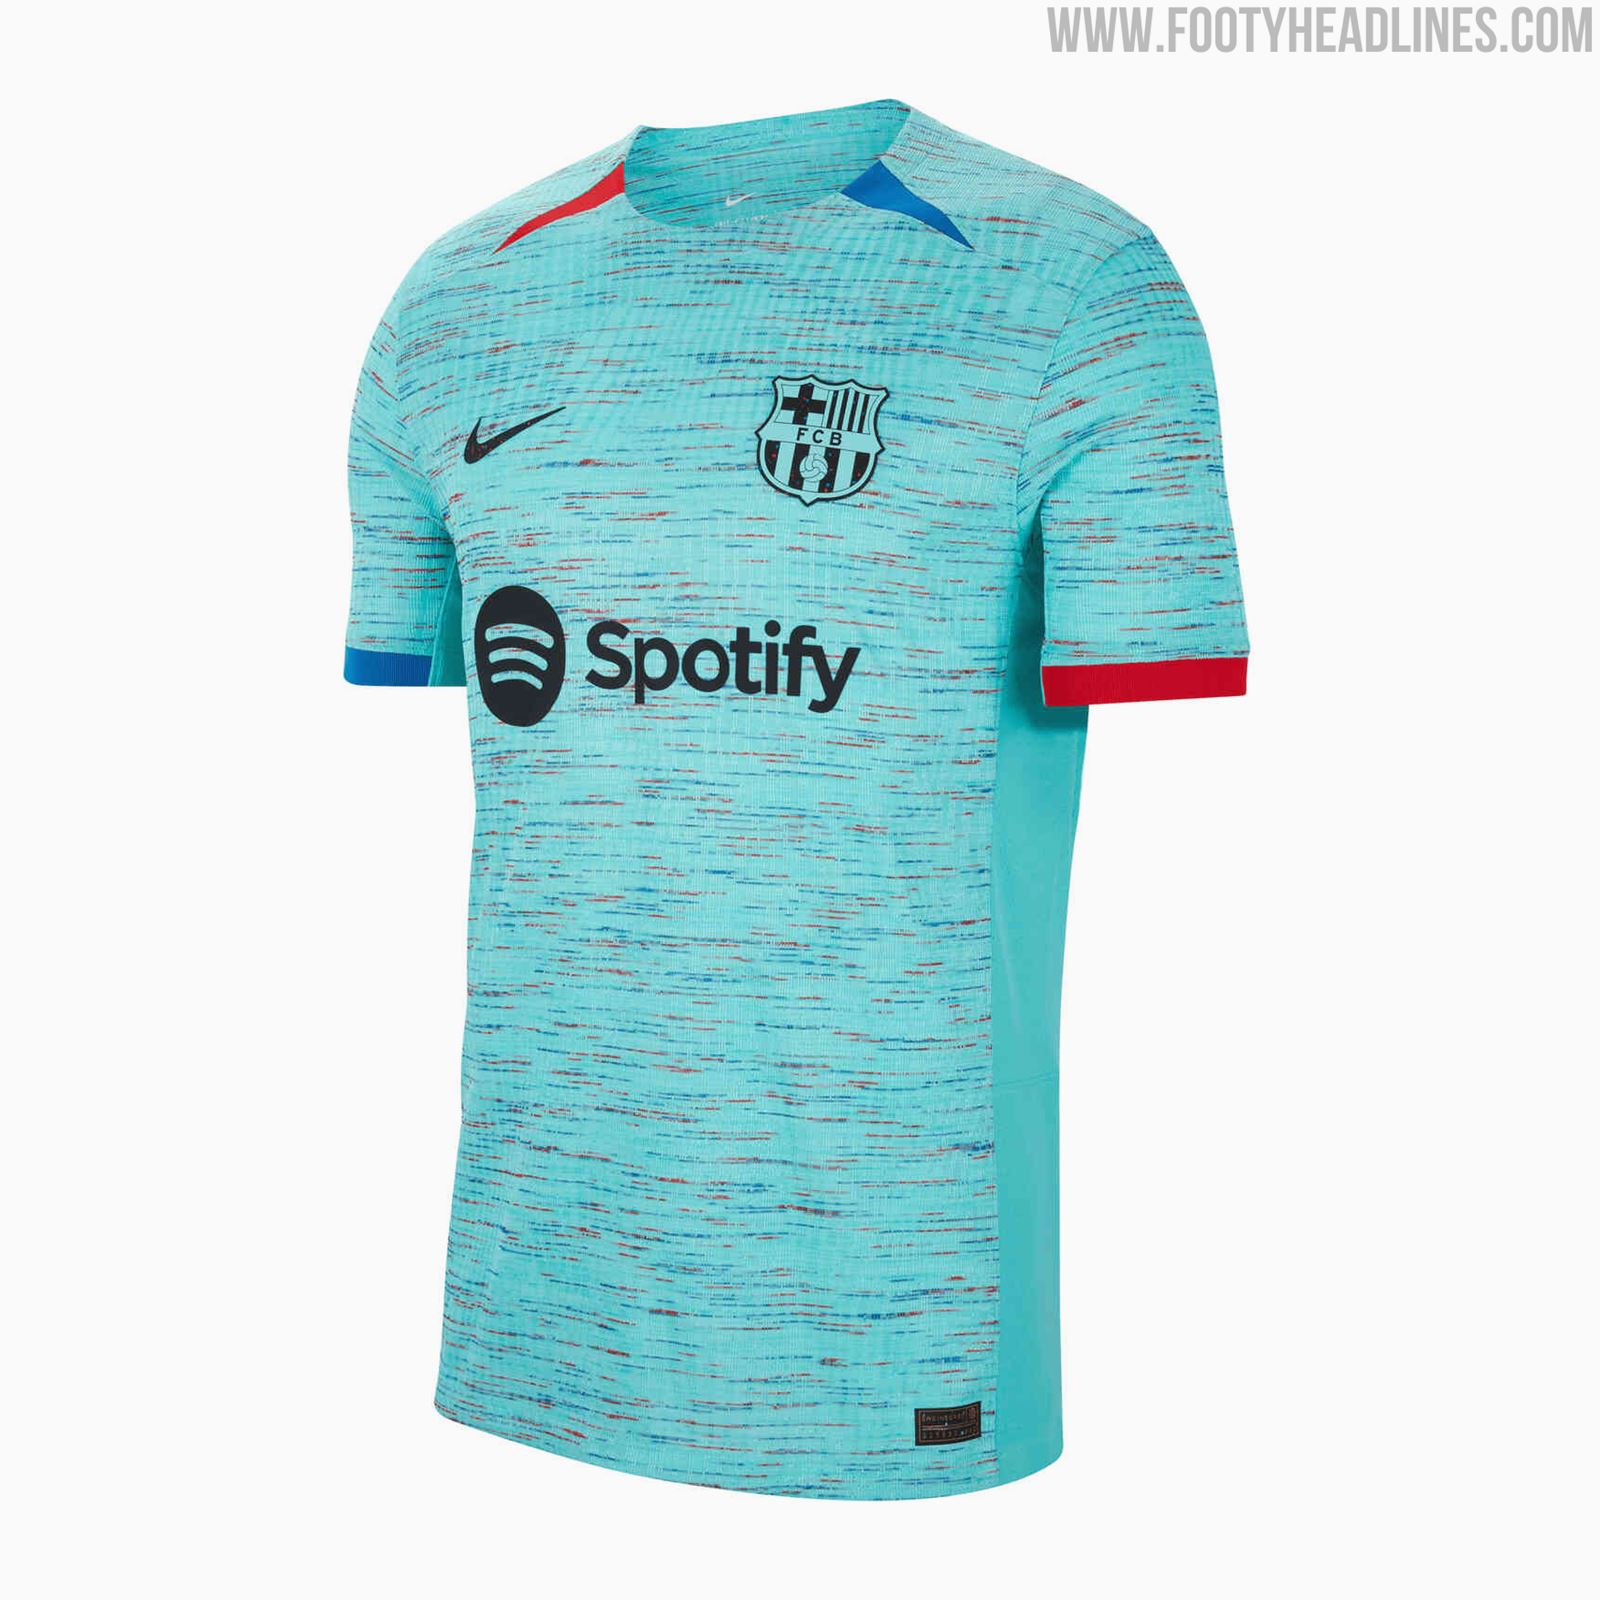 Dare To Do Different – 2022/23 Nike Third Kit unveiled